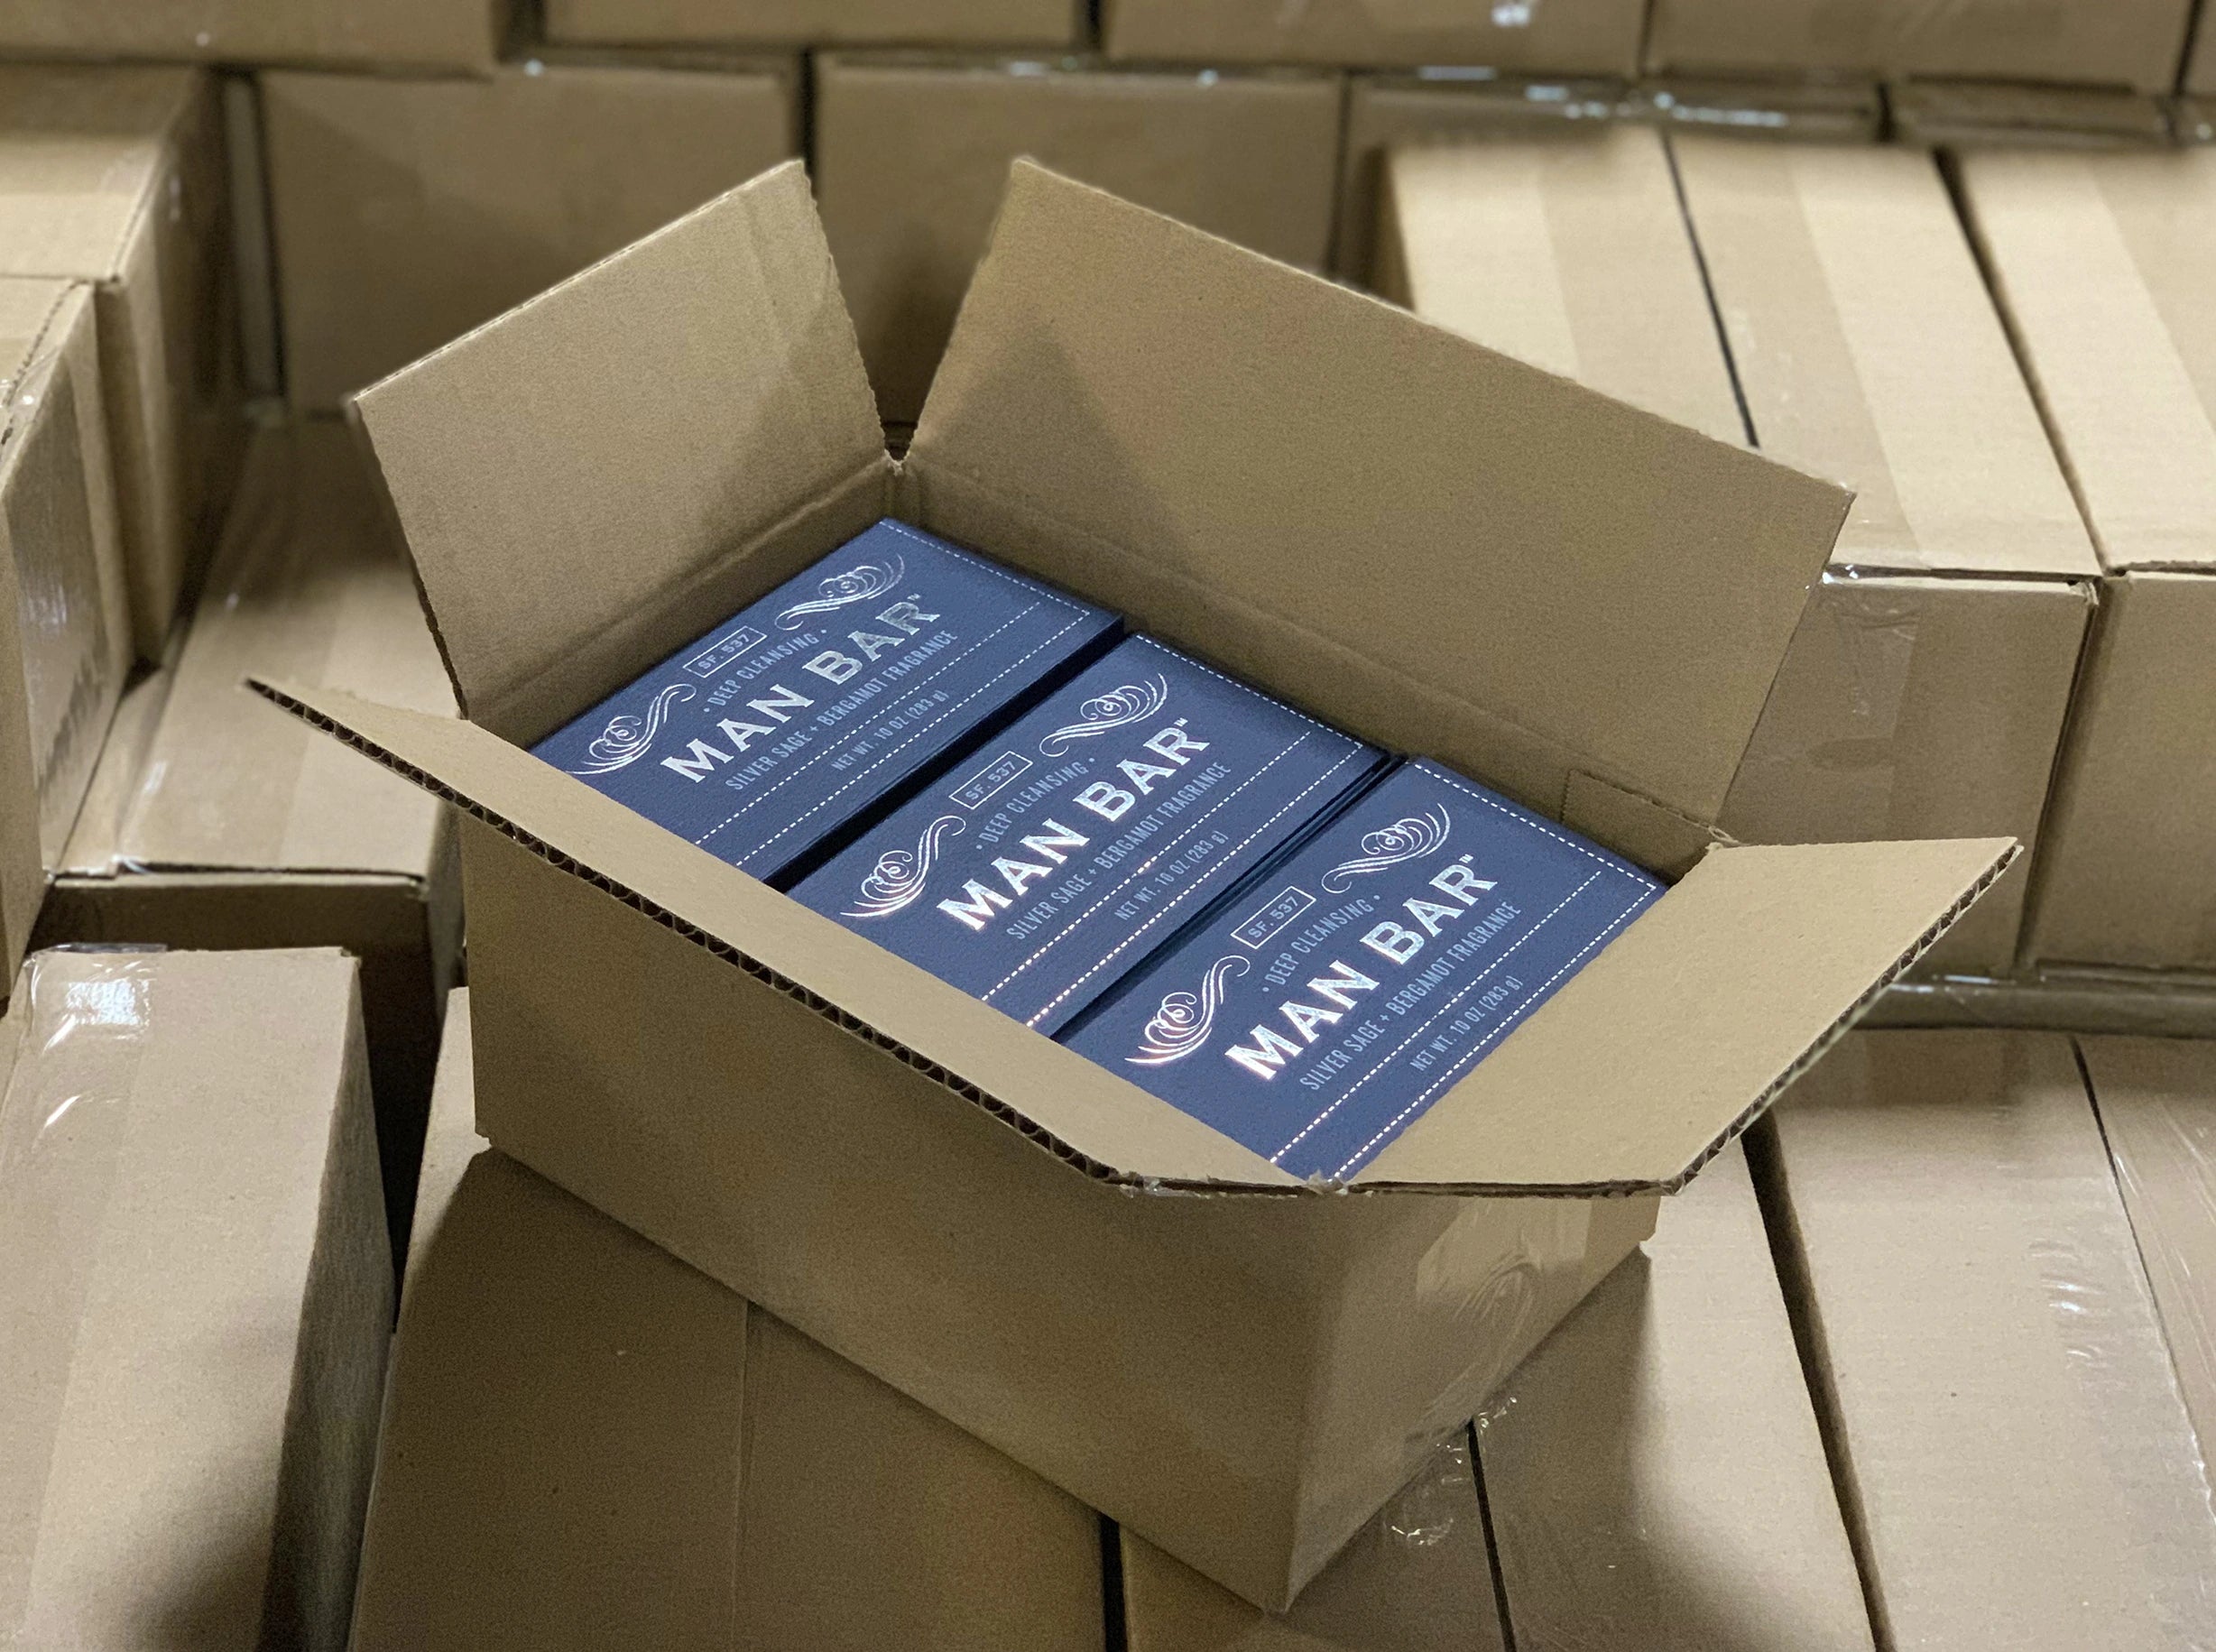 Photo of a pallet of boxes full of Man Bar soaps